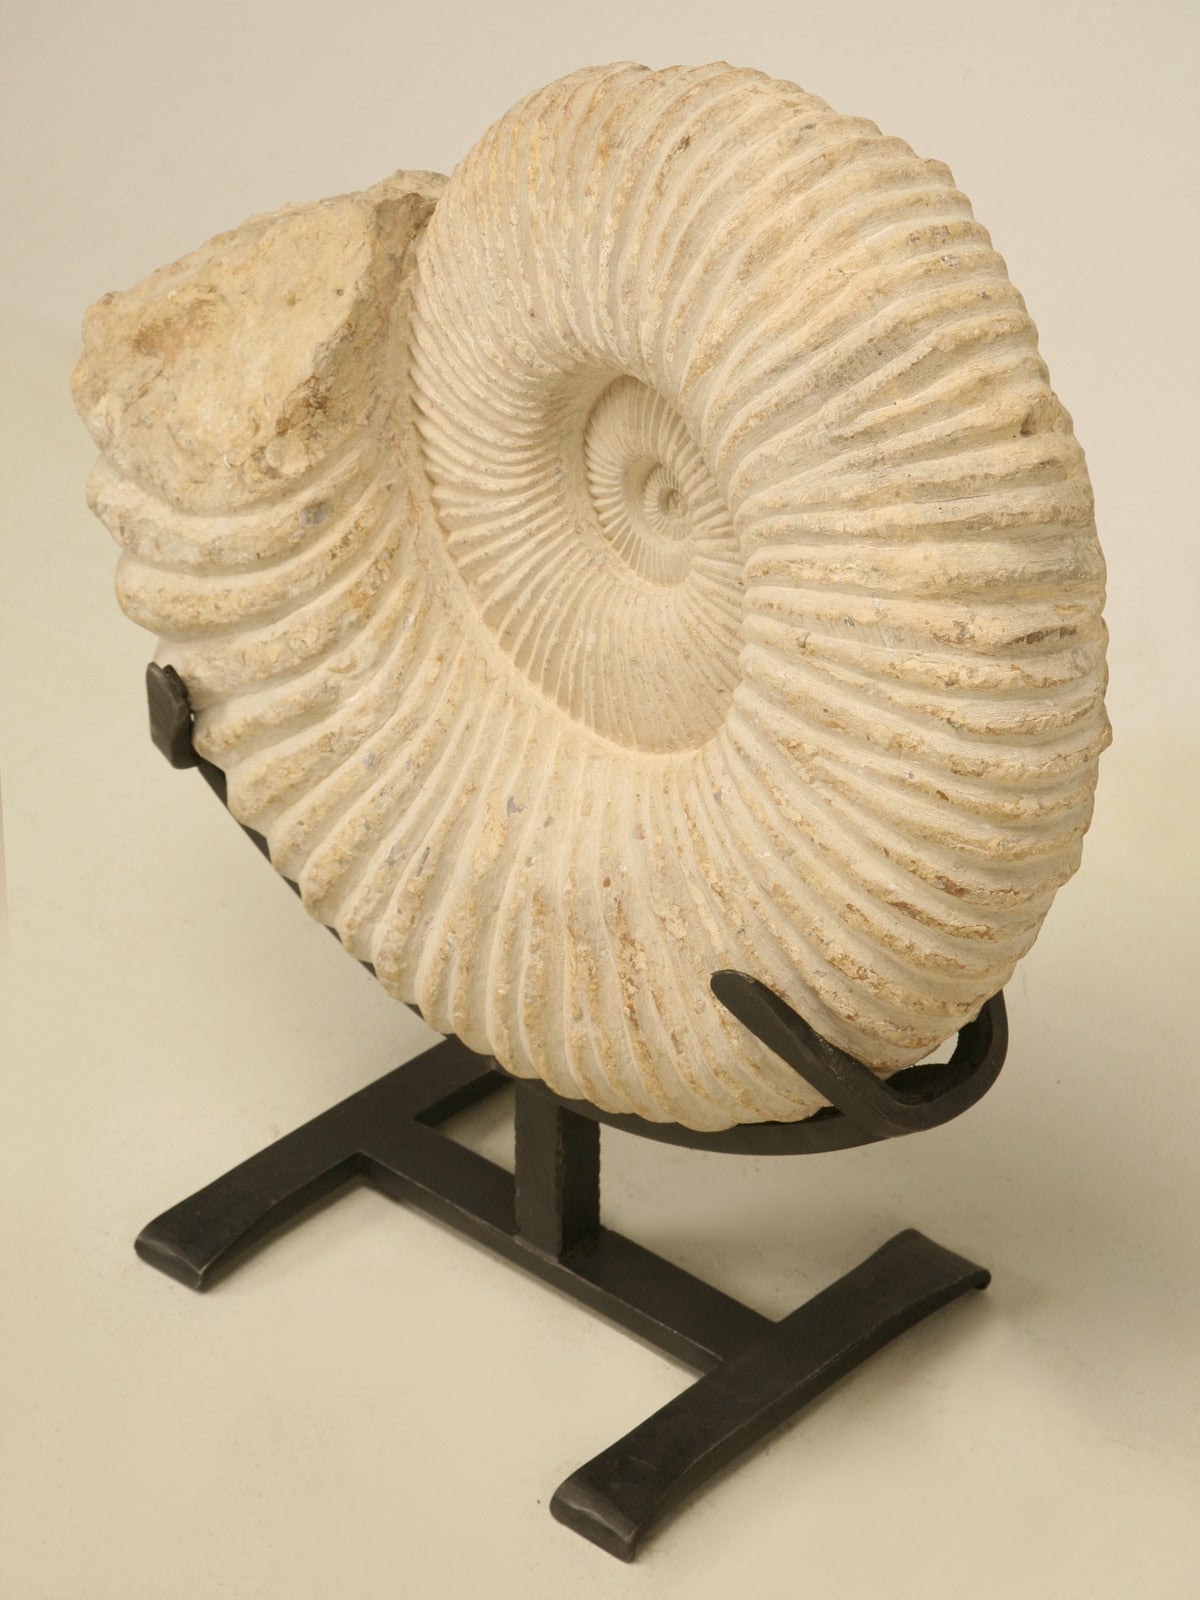 Ammonites are invertebrates and extinct members of the subclass Ammonoidea, class Cephalopoda. Ammonites began appearing during the Middle Devonian period about 400 million years ago that were mollusks, with shells that were tightly coiled on a